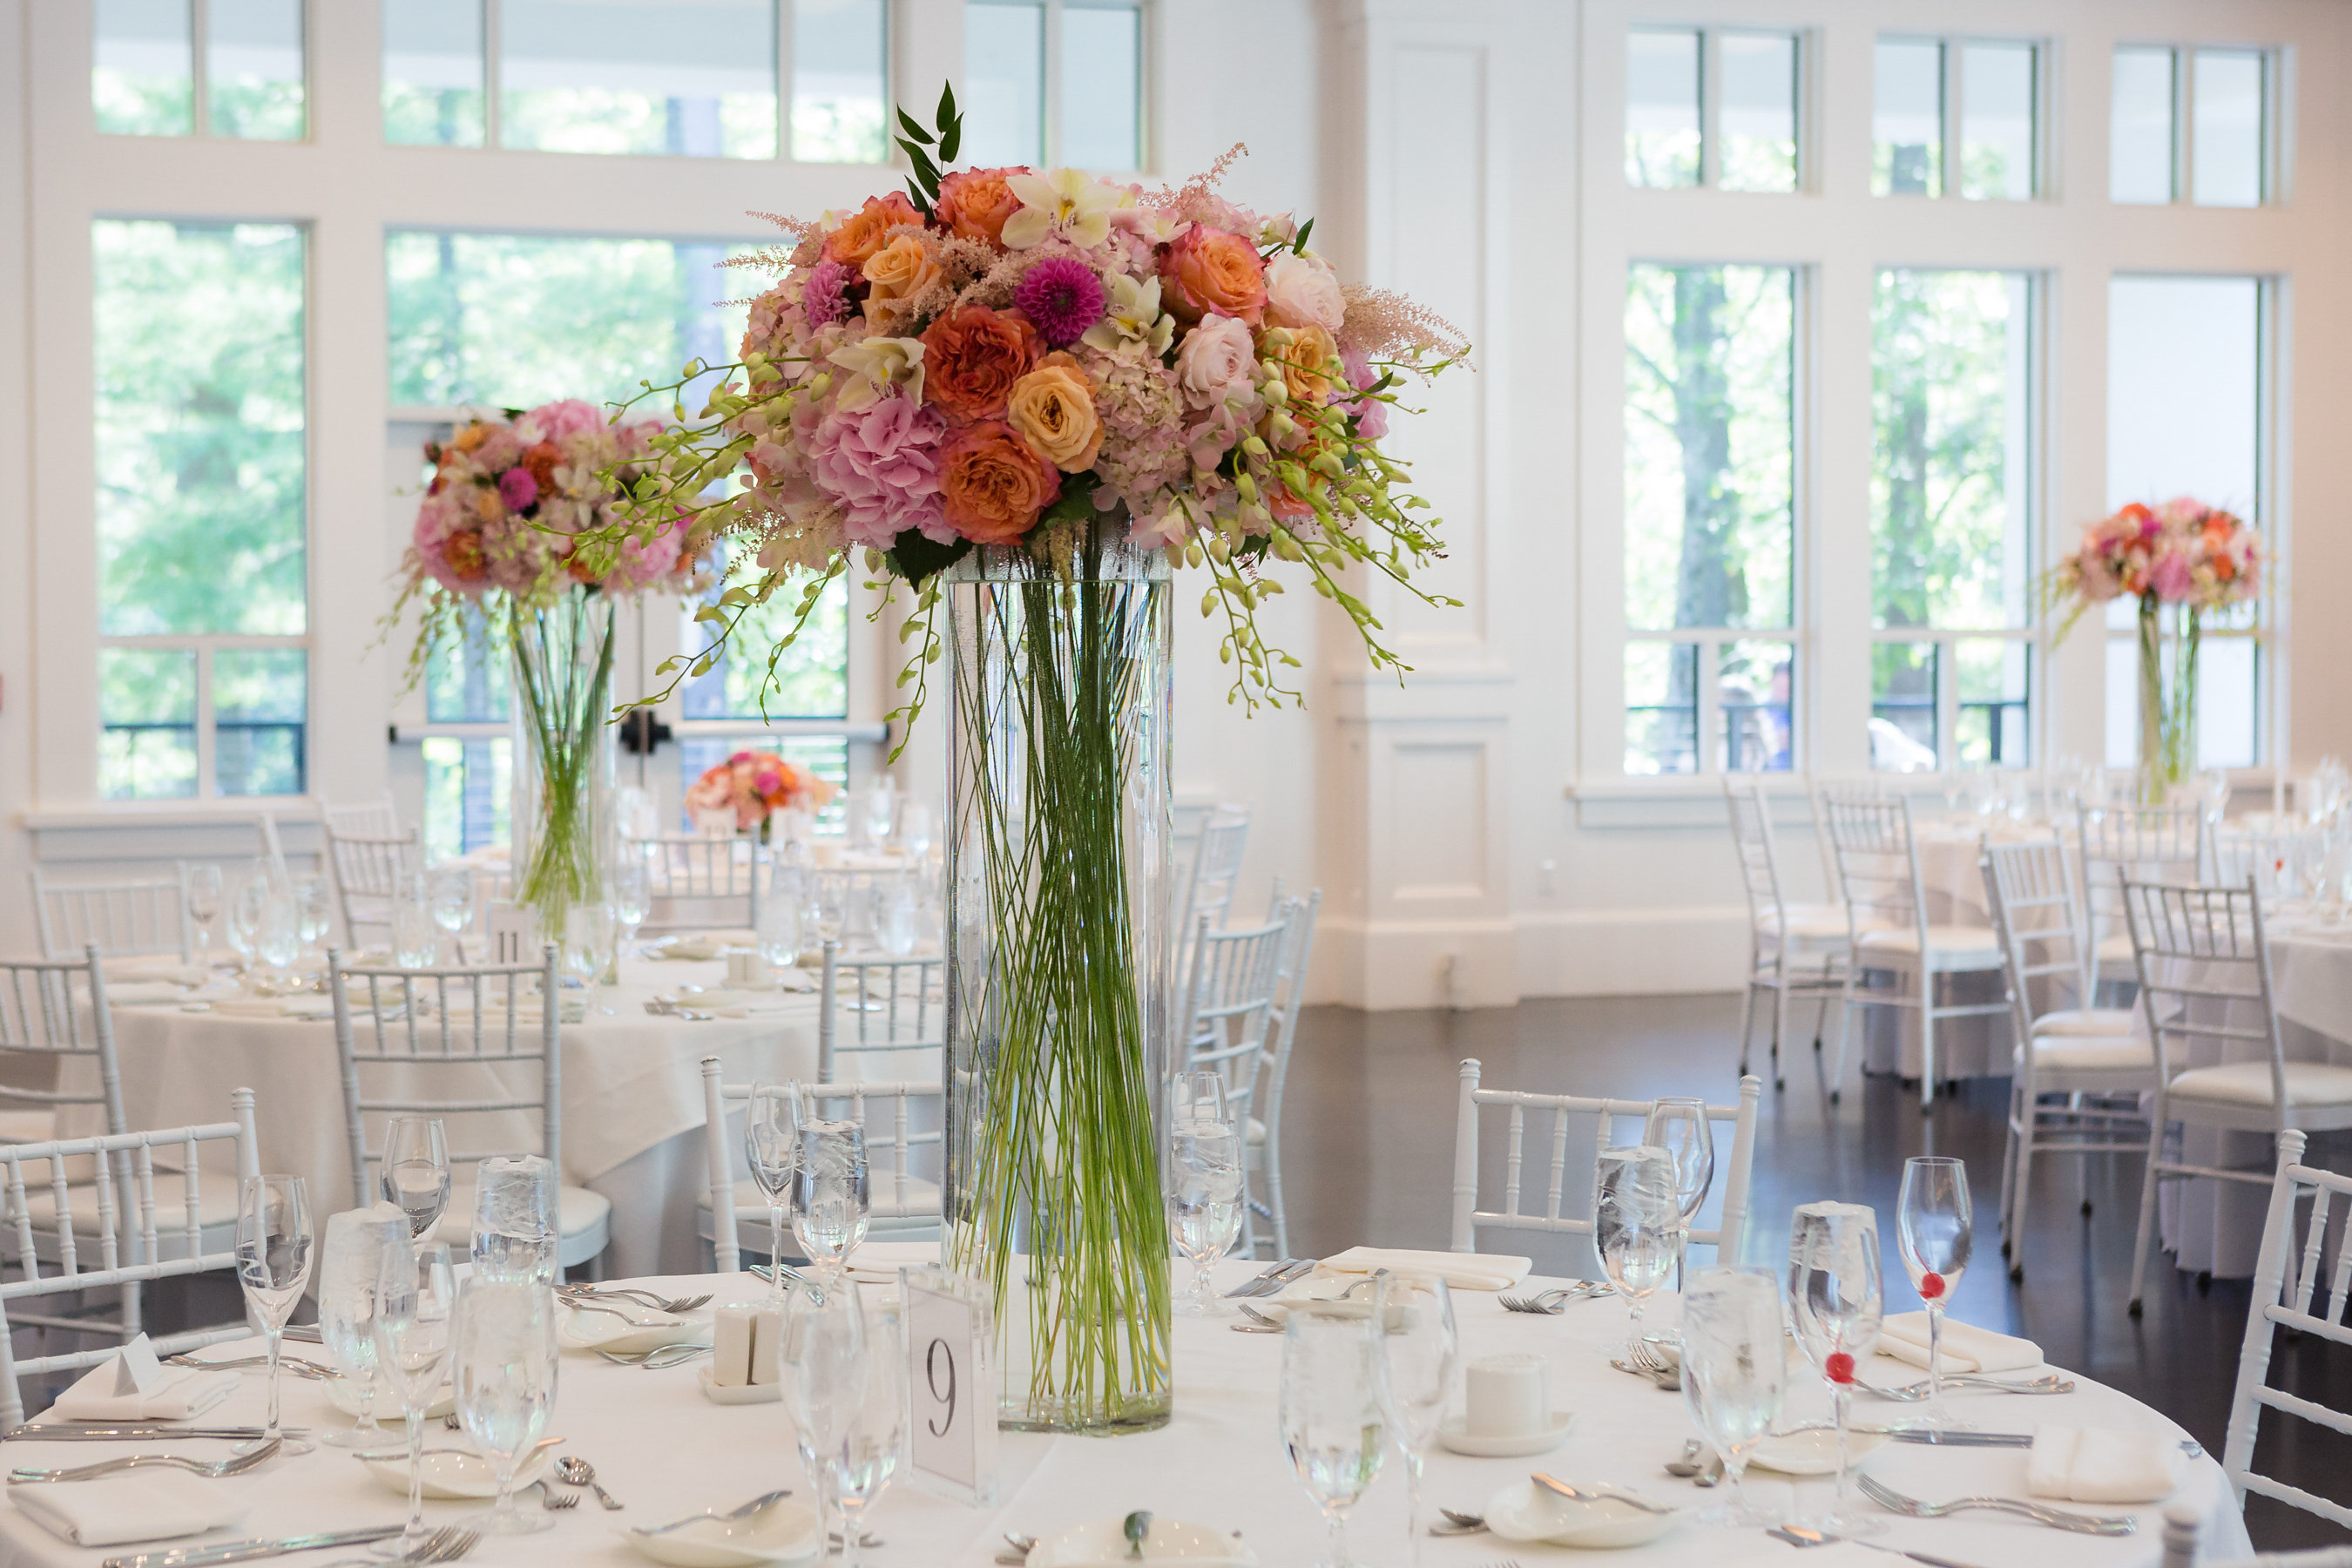 Tall wedding centerpieces with pink and orange flowers